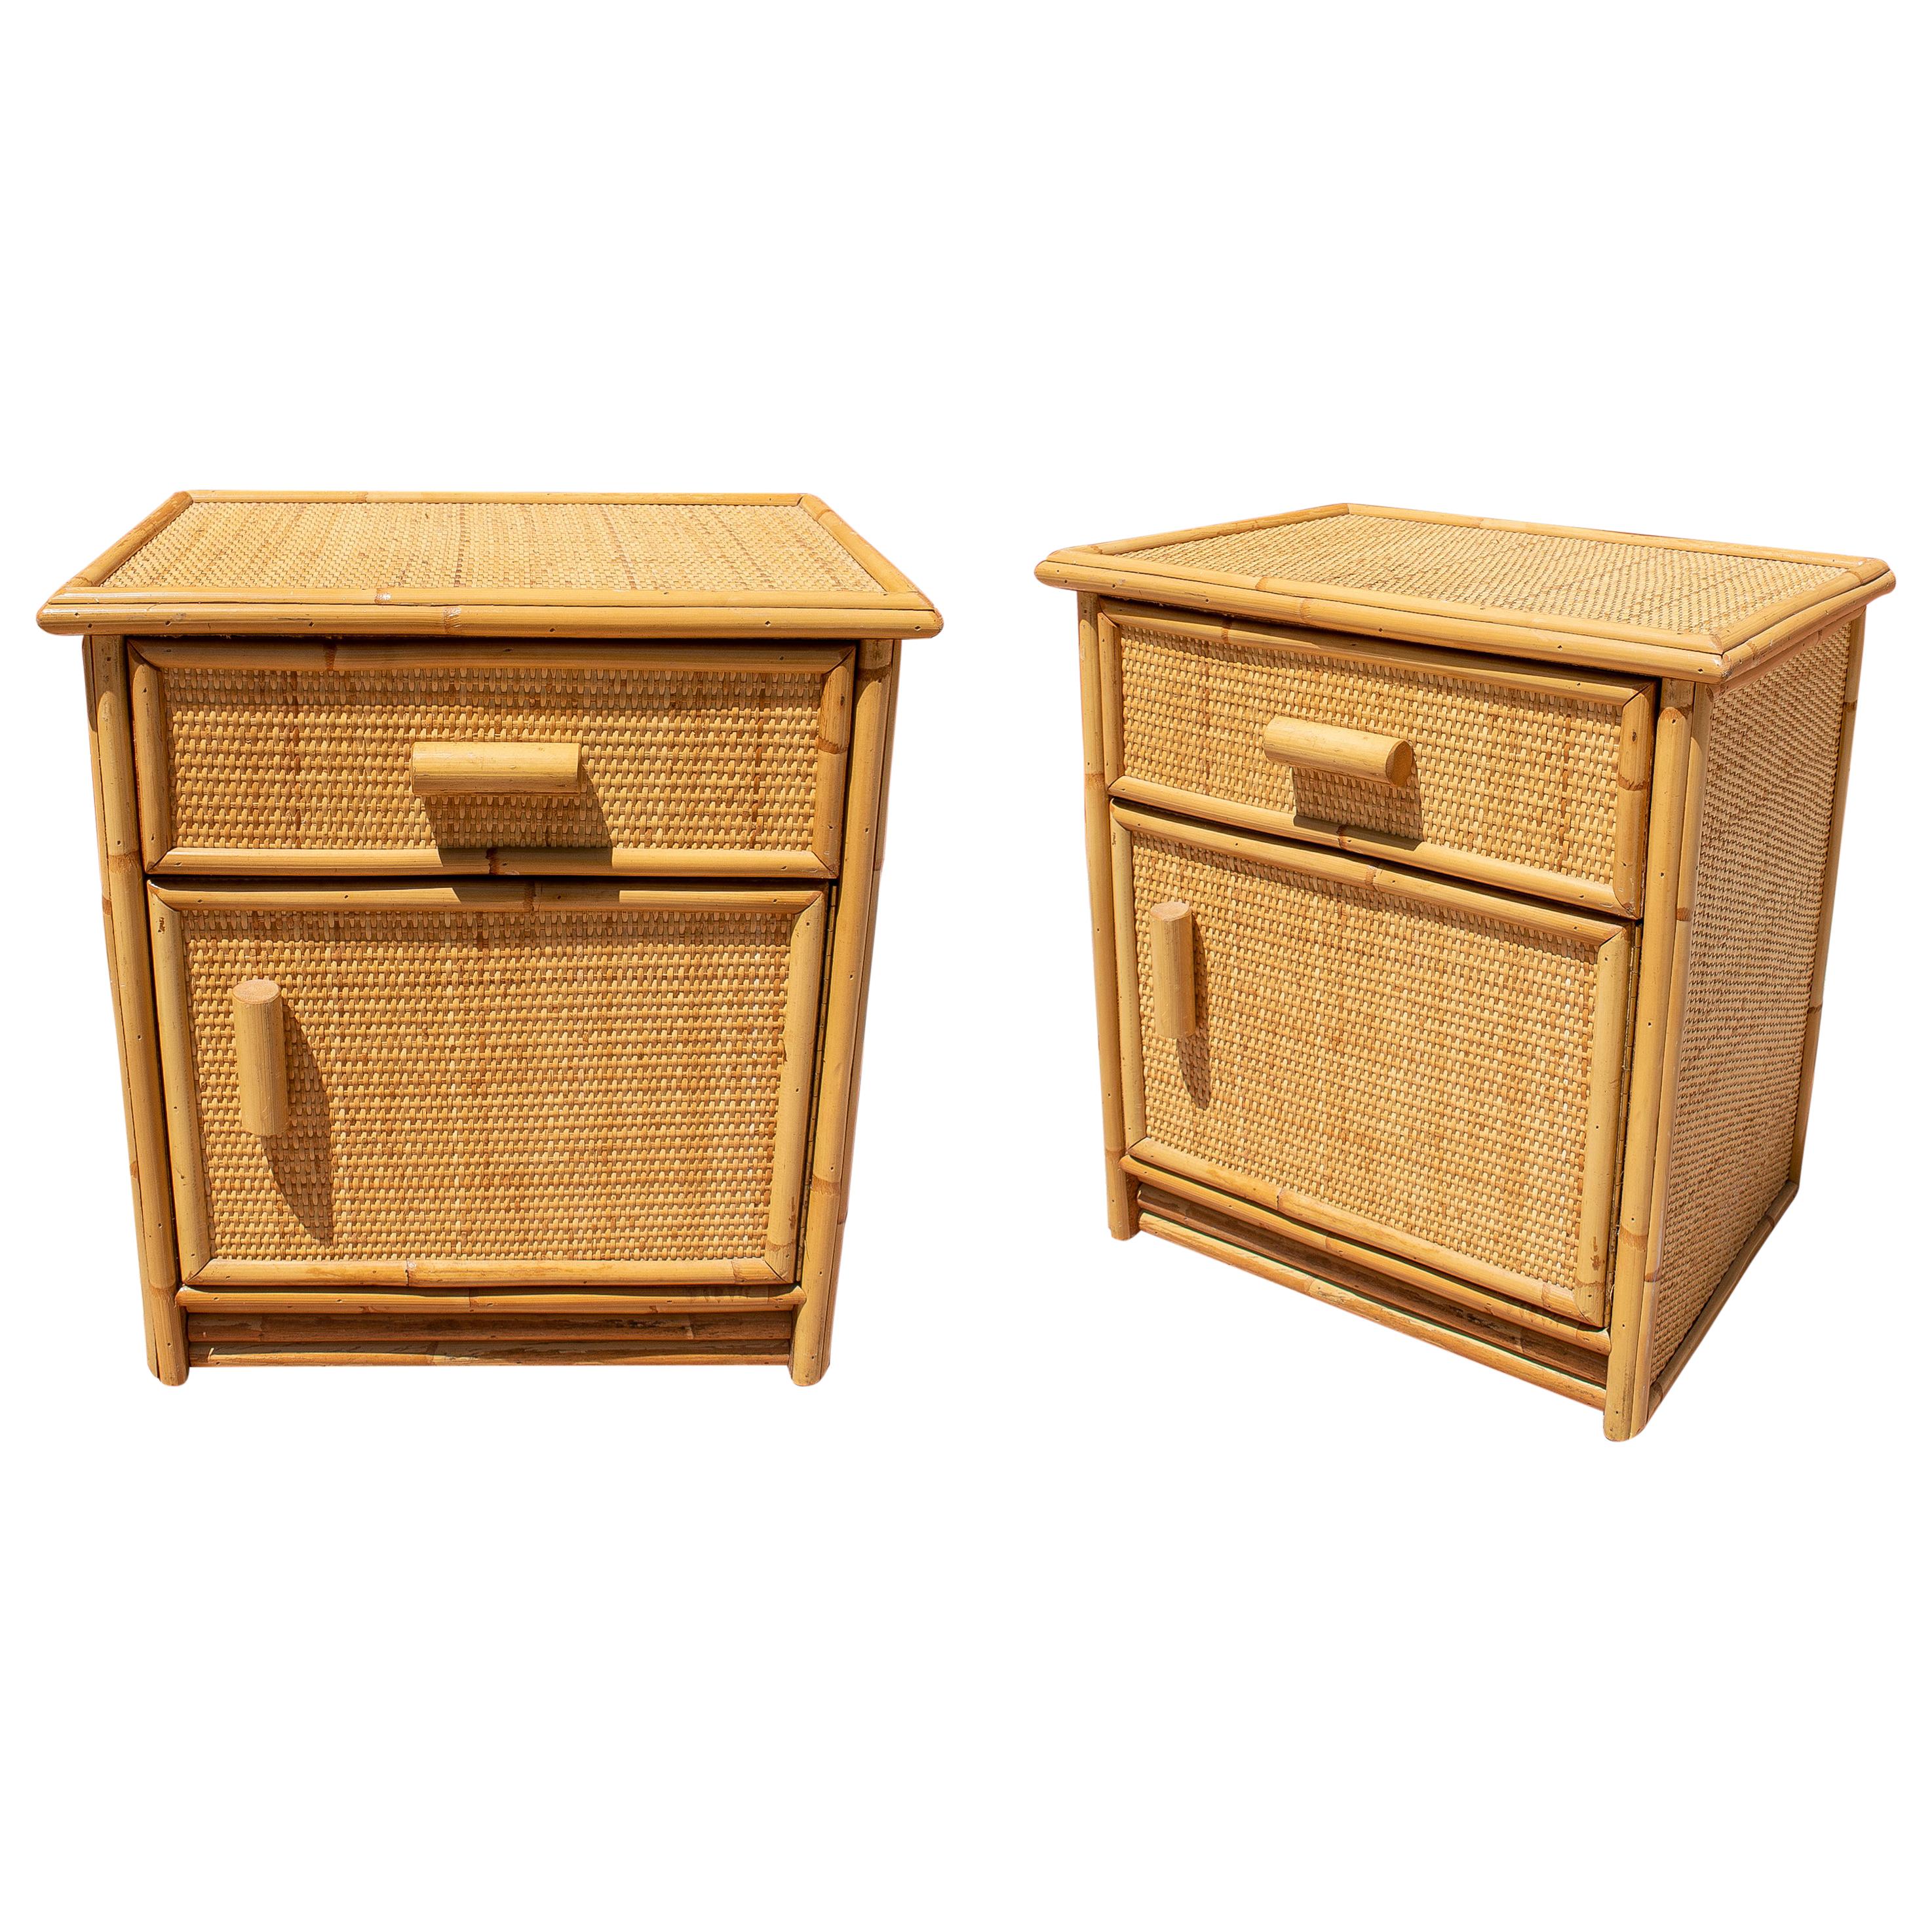 Pair of 1970s Spanish Lace Wicker and Bamboo 1-Drawer & 1-Door Bedside Tables